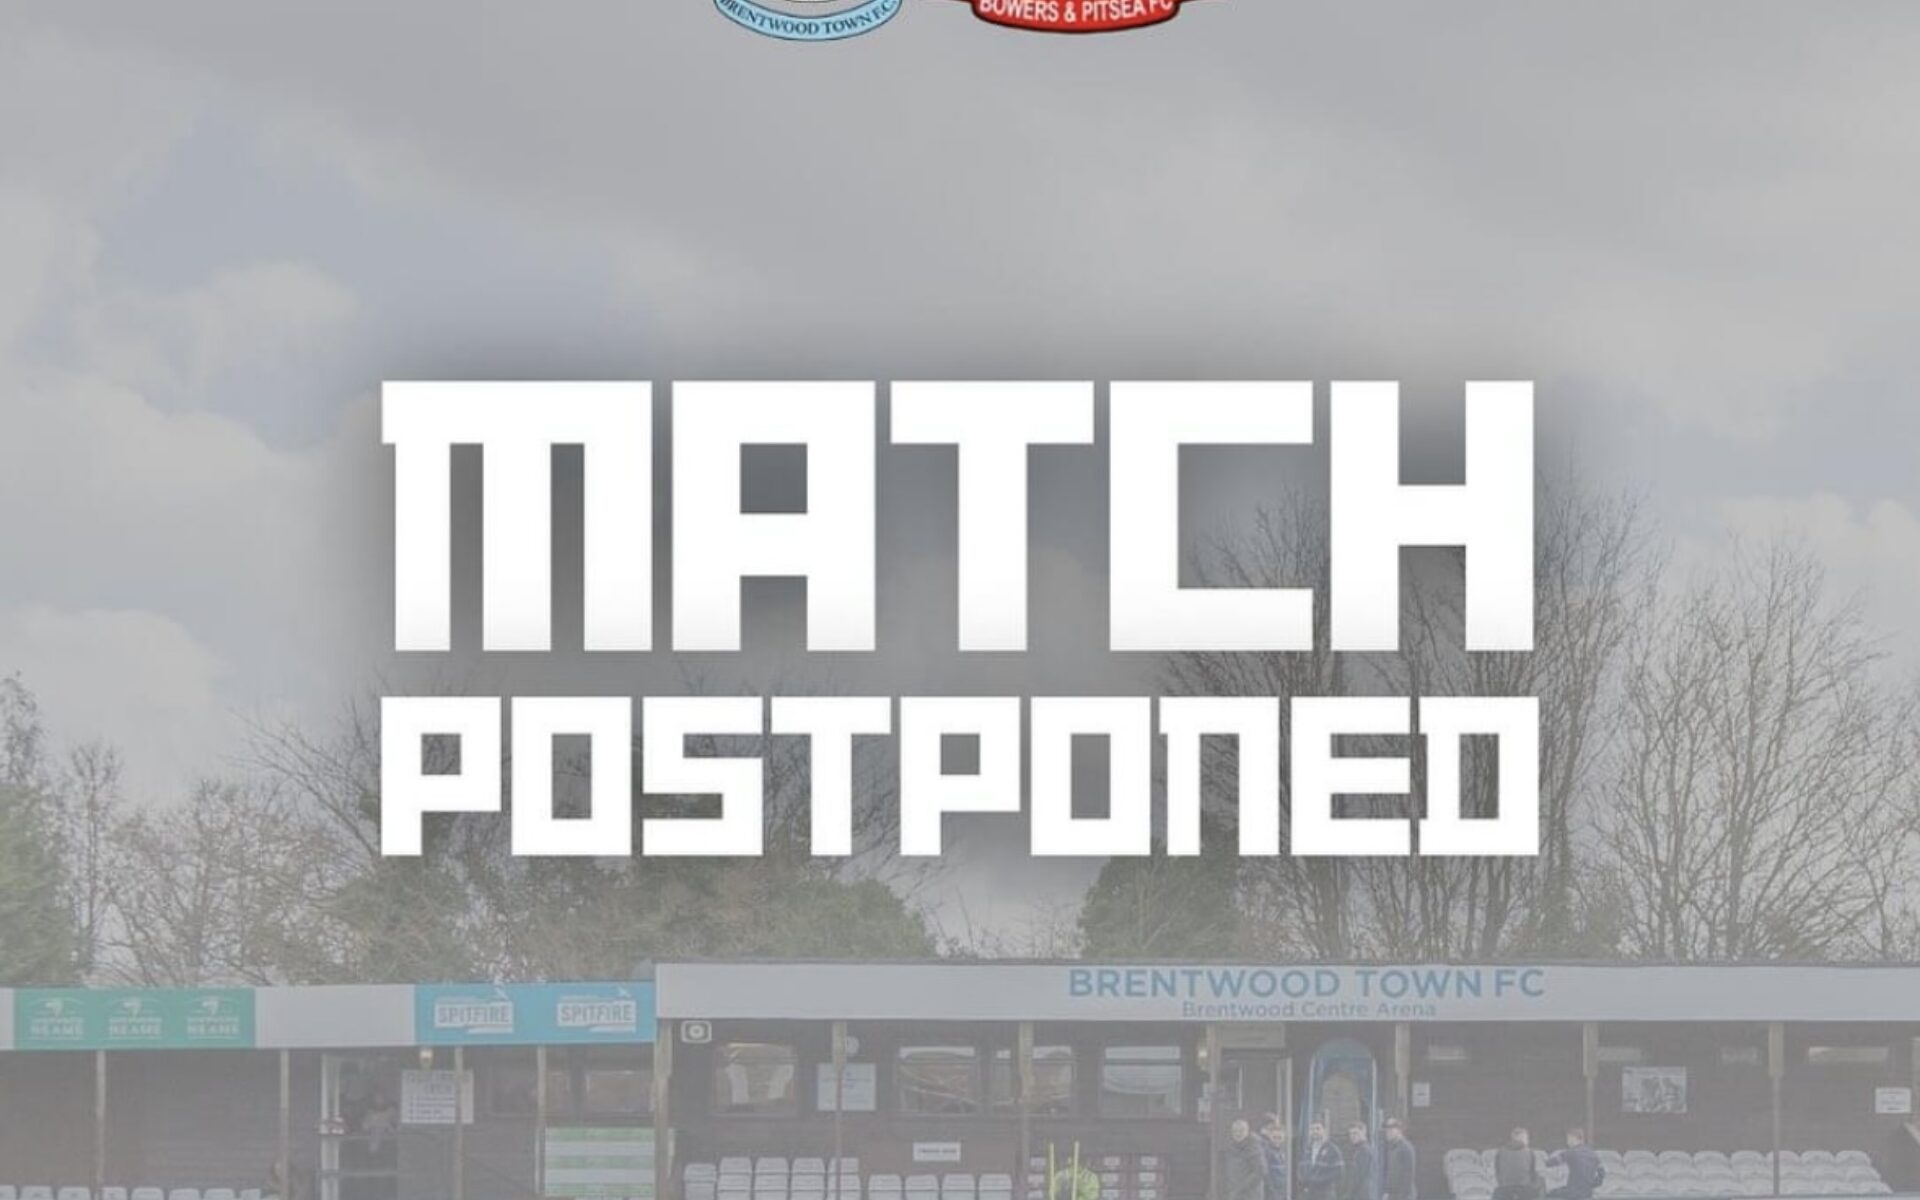 Brentwood Town v Bowers & Pitsea - Postponed Featured Image